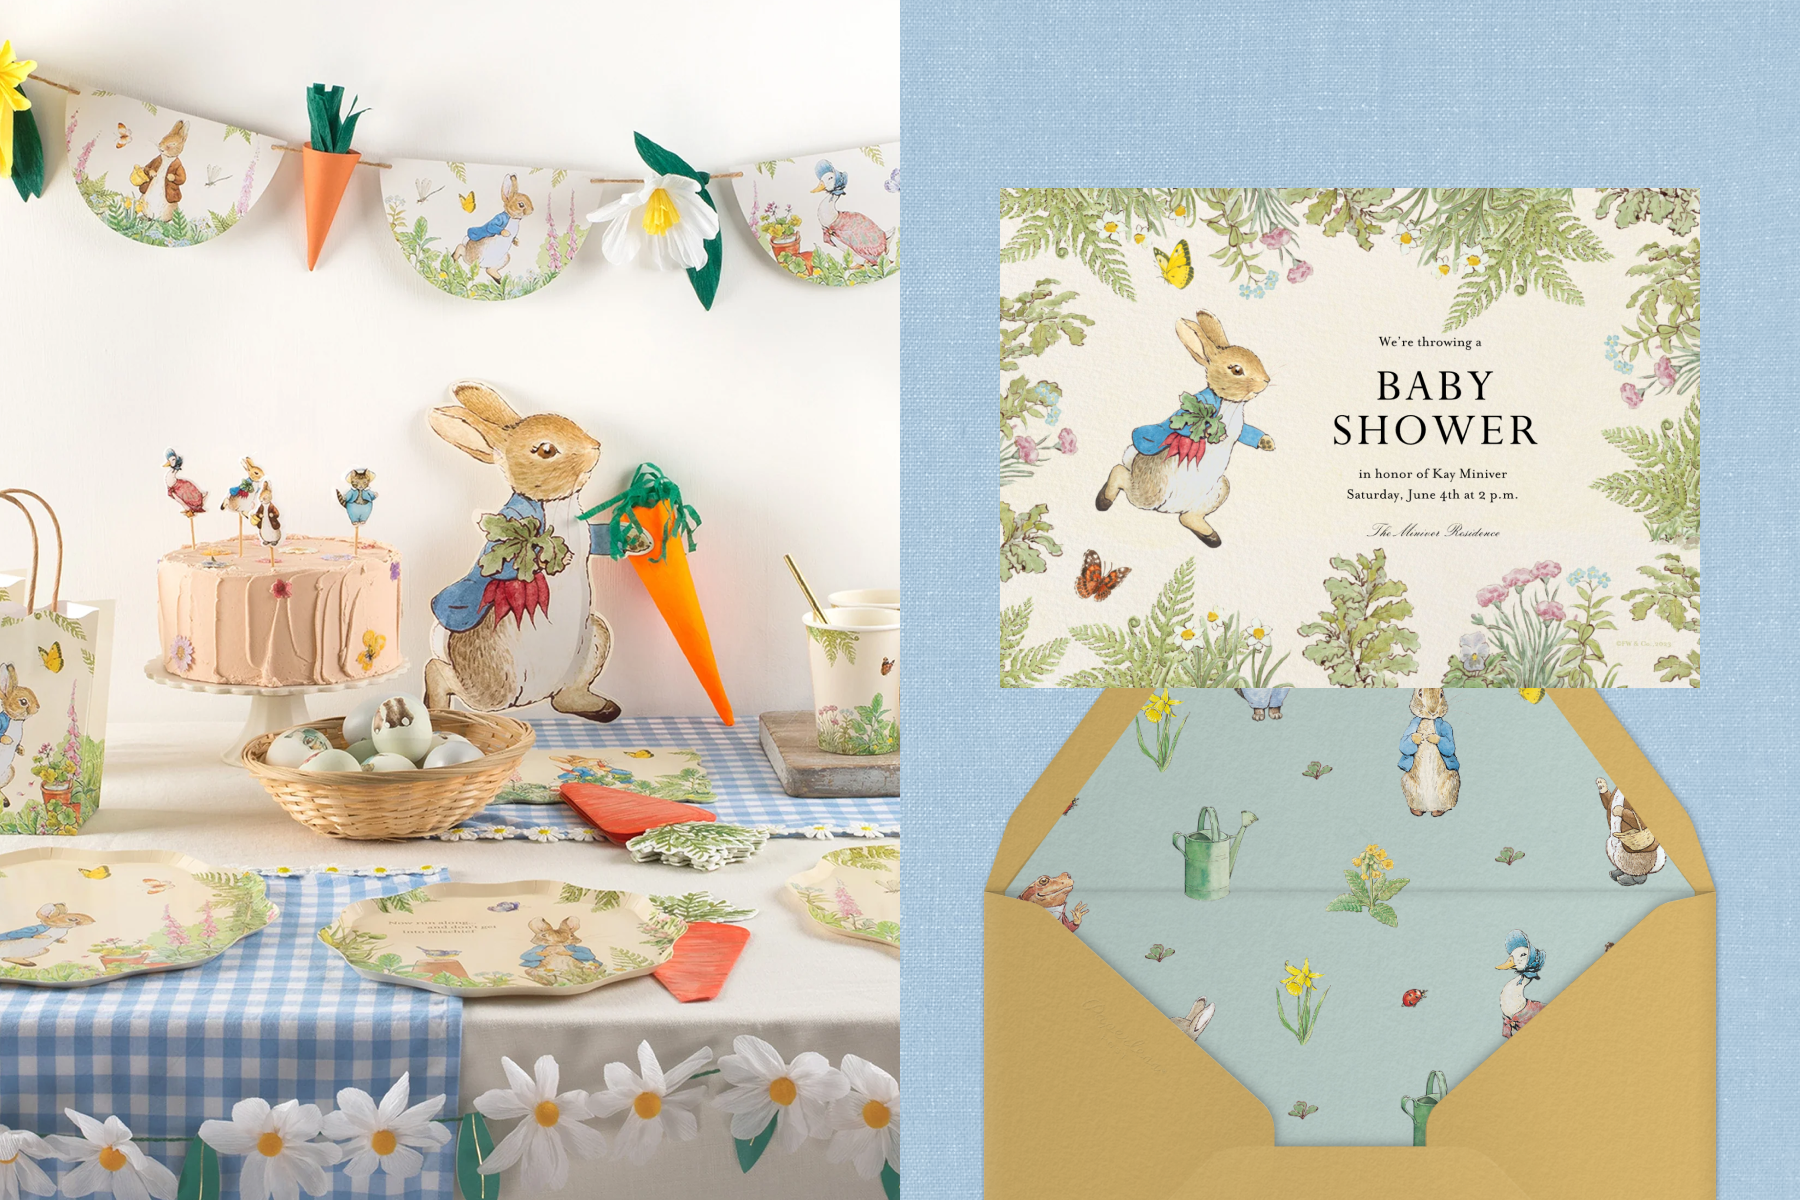 A blue gingham table decorated with Peter Rabbit party supplies; a baby shower invitation with Peter Rabbit and garden greens with a matching envelope.